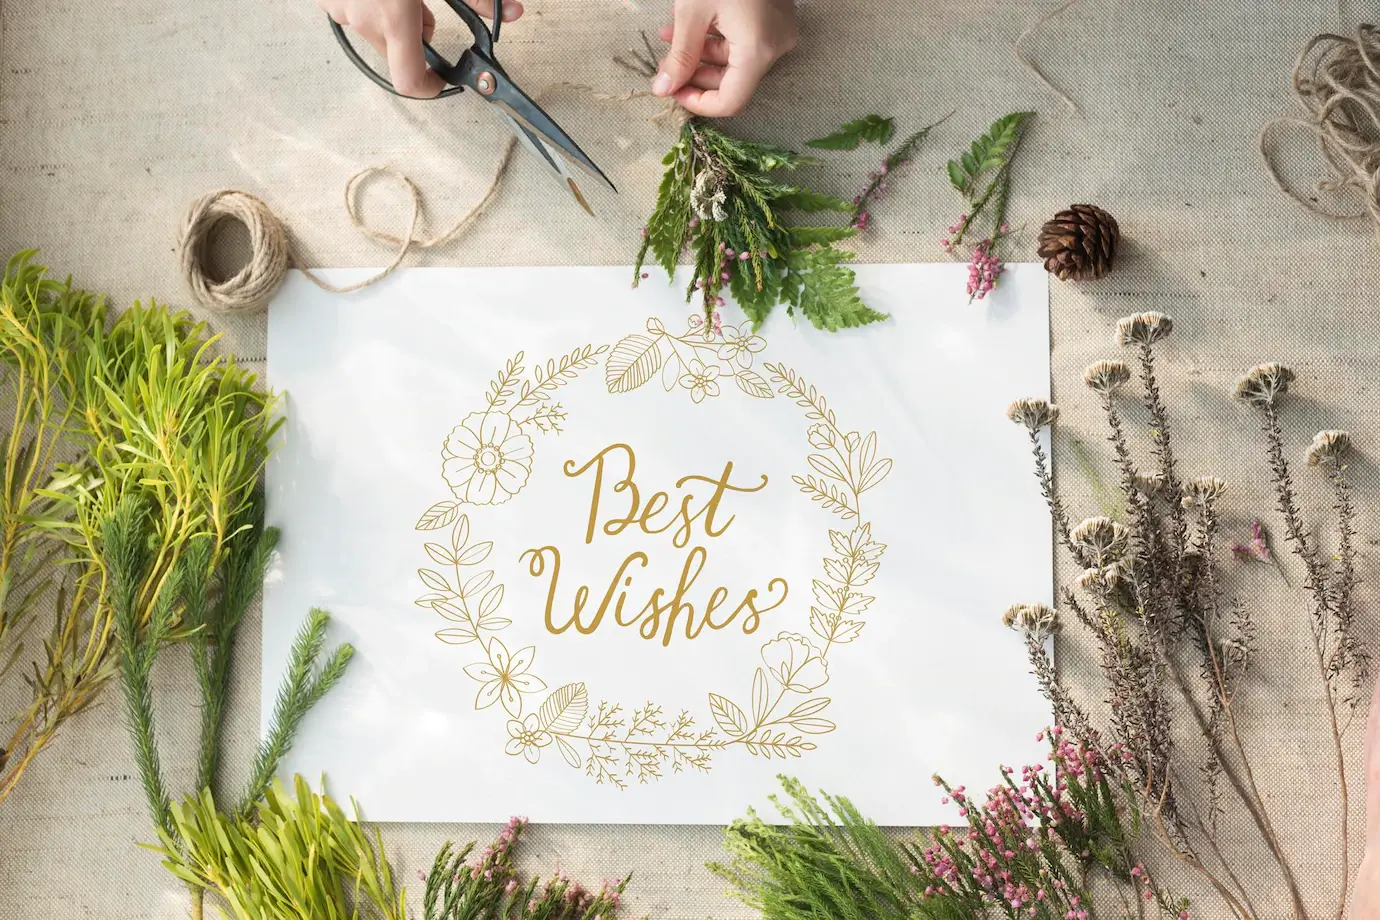 Best Wishes: Wishes Ideas for Family and Friends